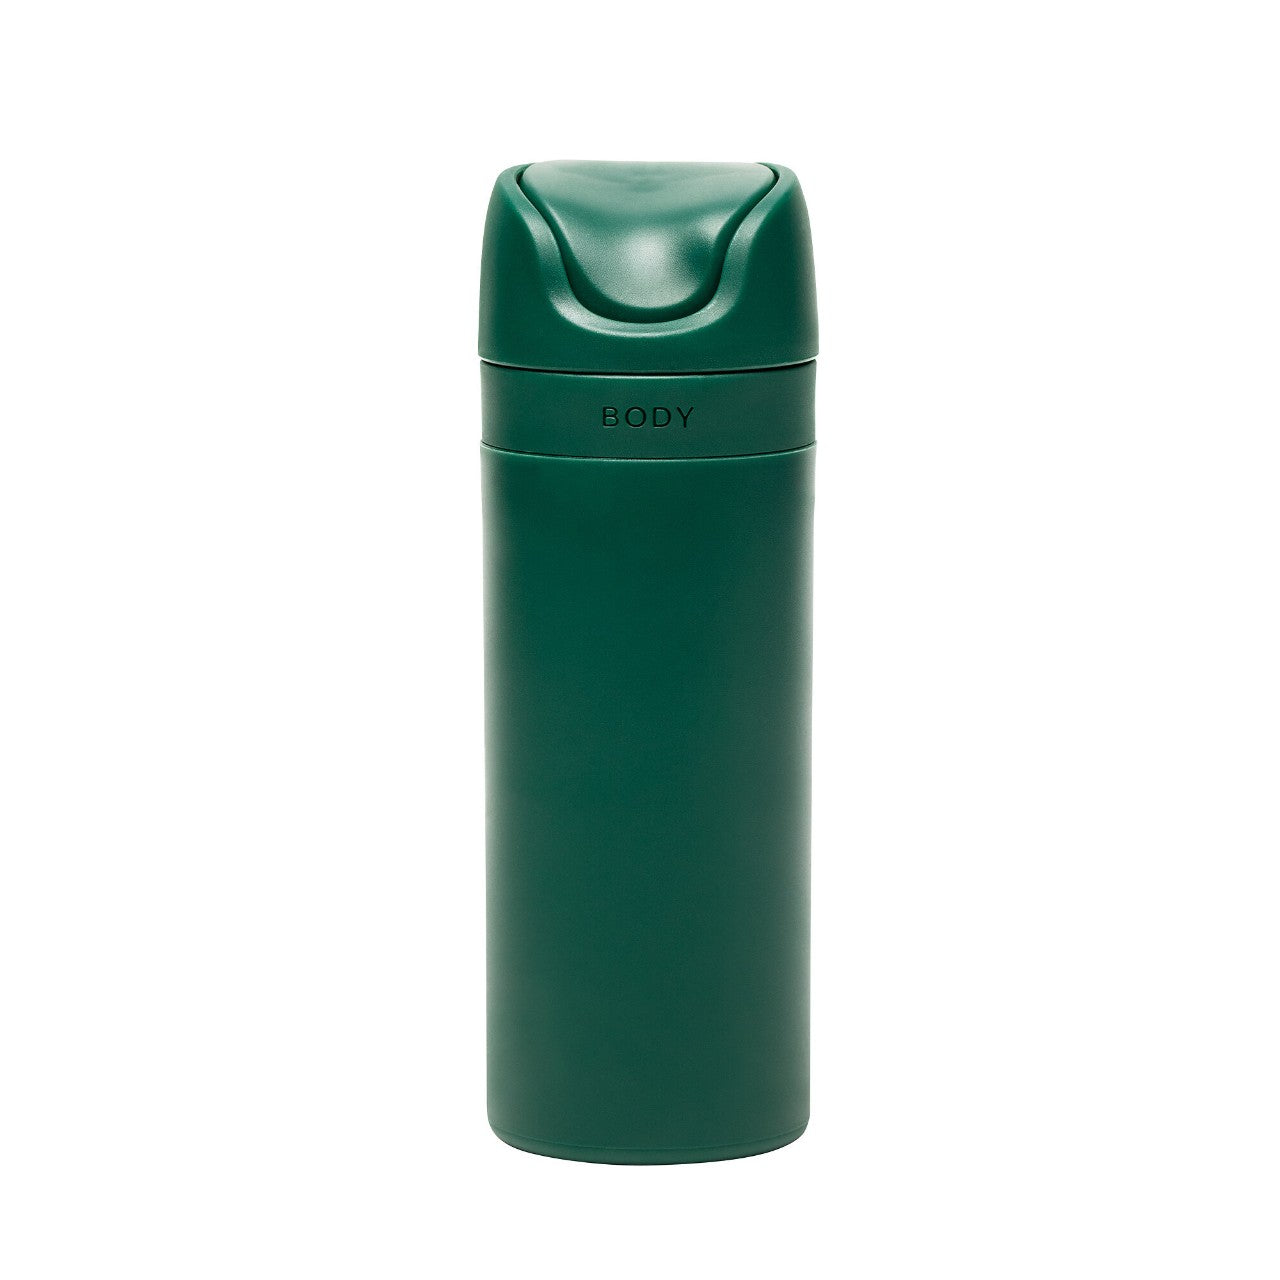 PREORDEN Ries - The Essential Refillable Travel Container